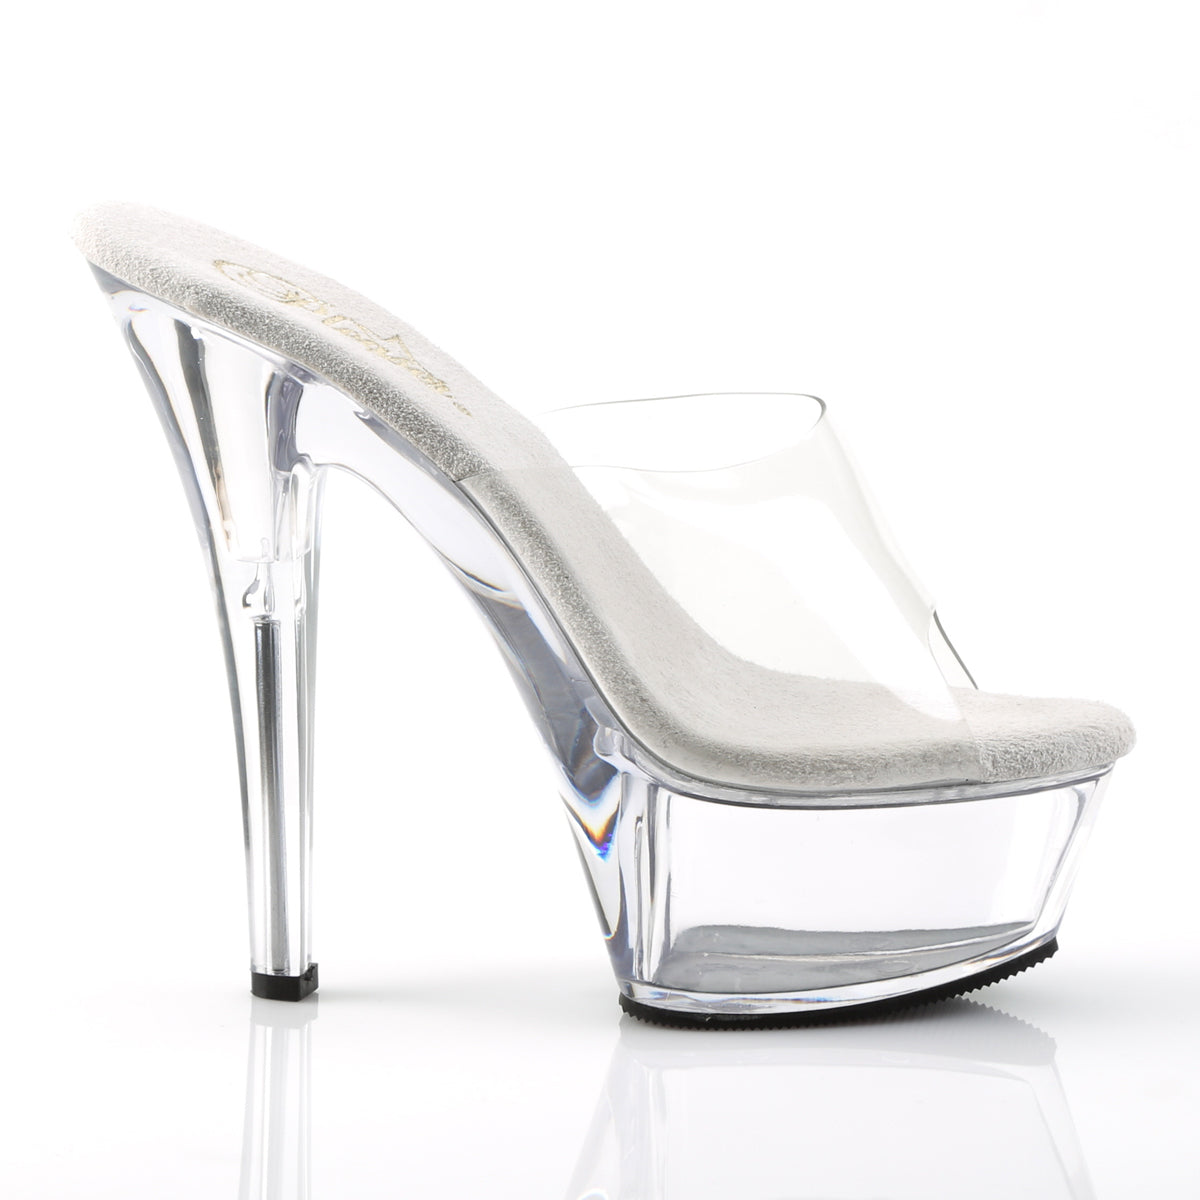 KISS-201 Pleaser 6 Inch Heel Clear Pole Dancing Platforms-Pleaser- Sexy Shoes Fetish Heels